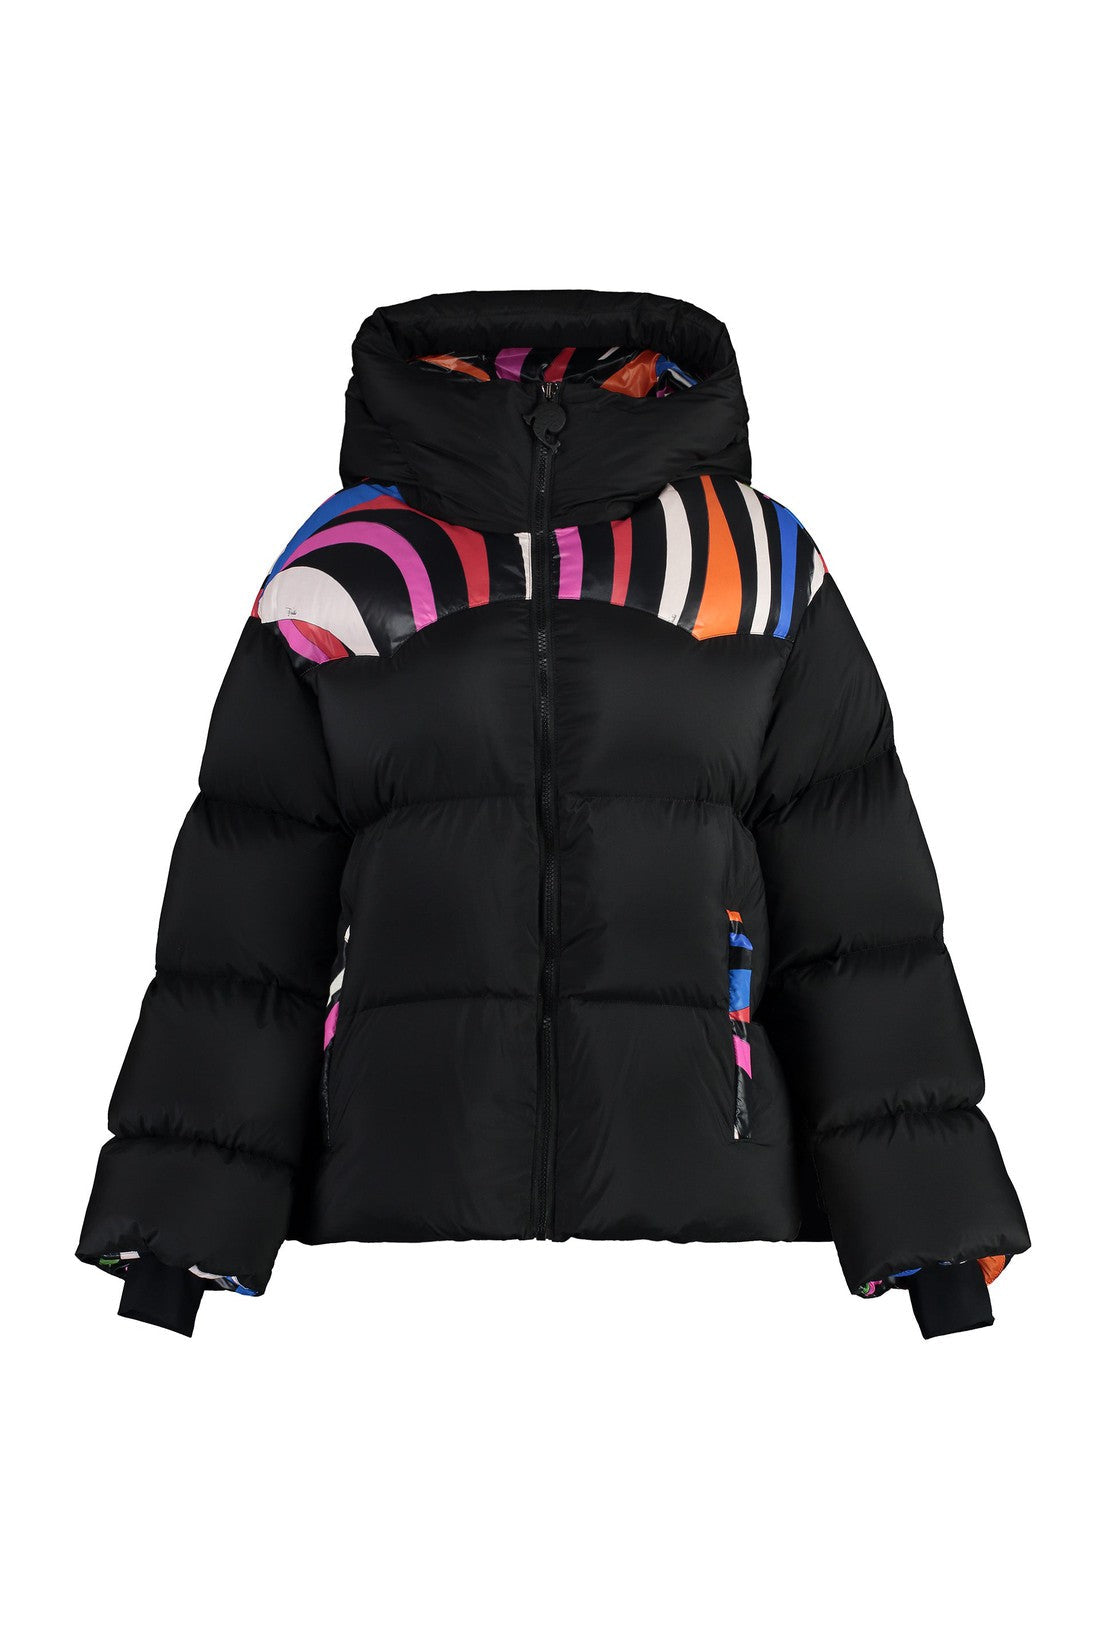 PUCCI-OUTLET-SALE-Hooded nylon down jacket-ARCHIVIST